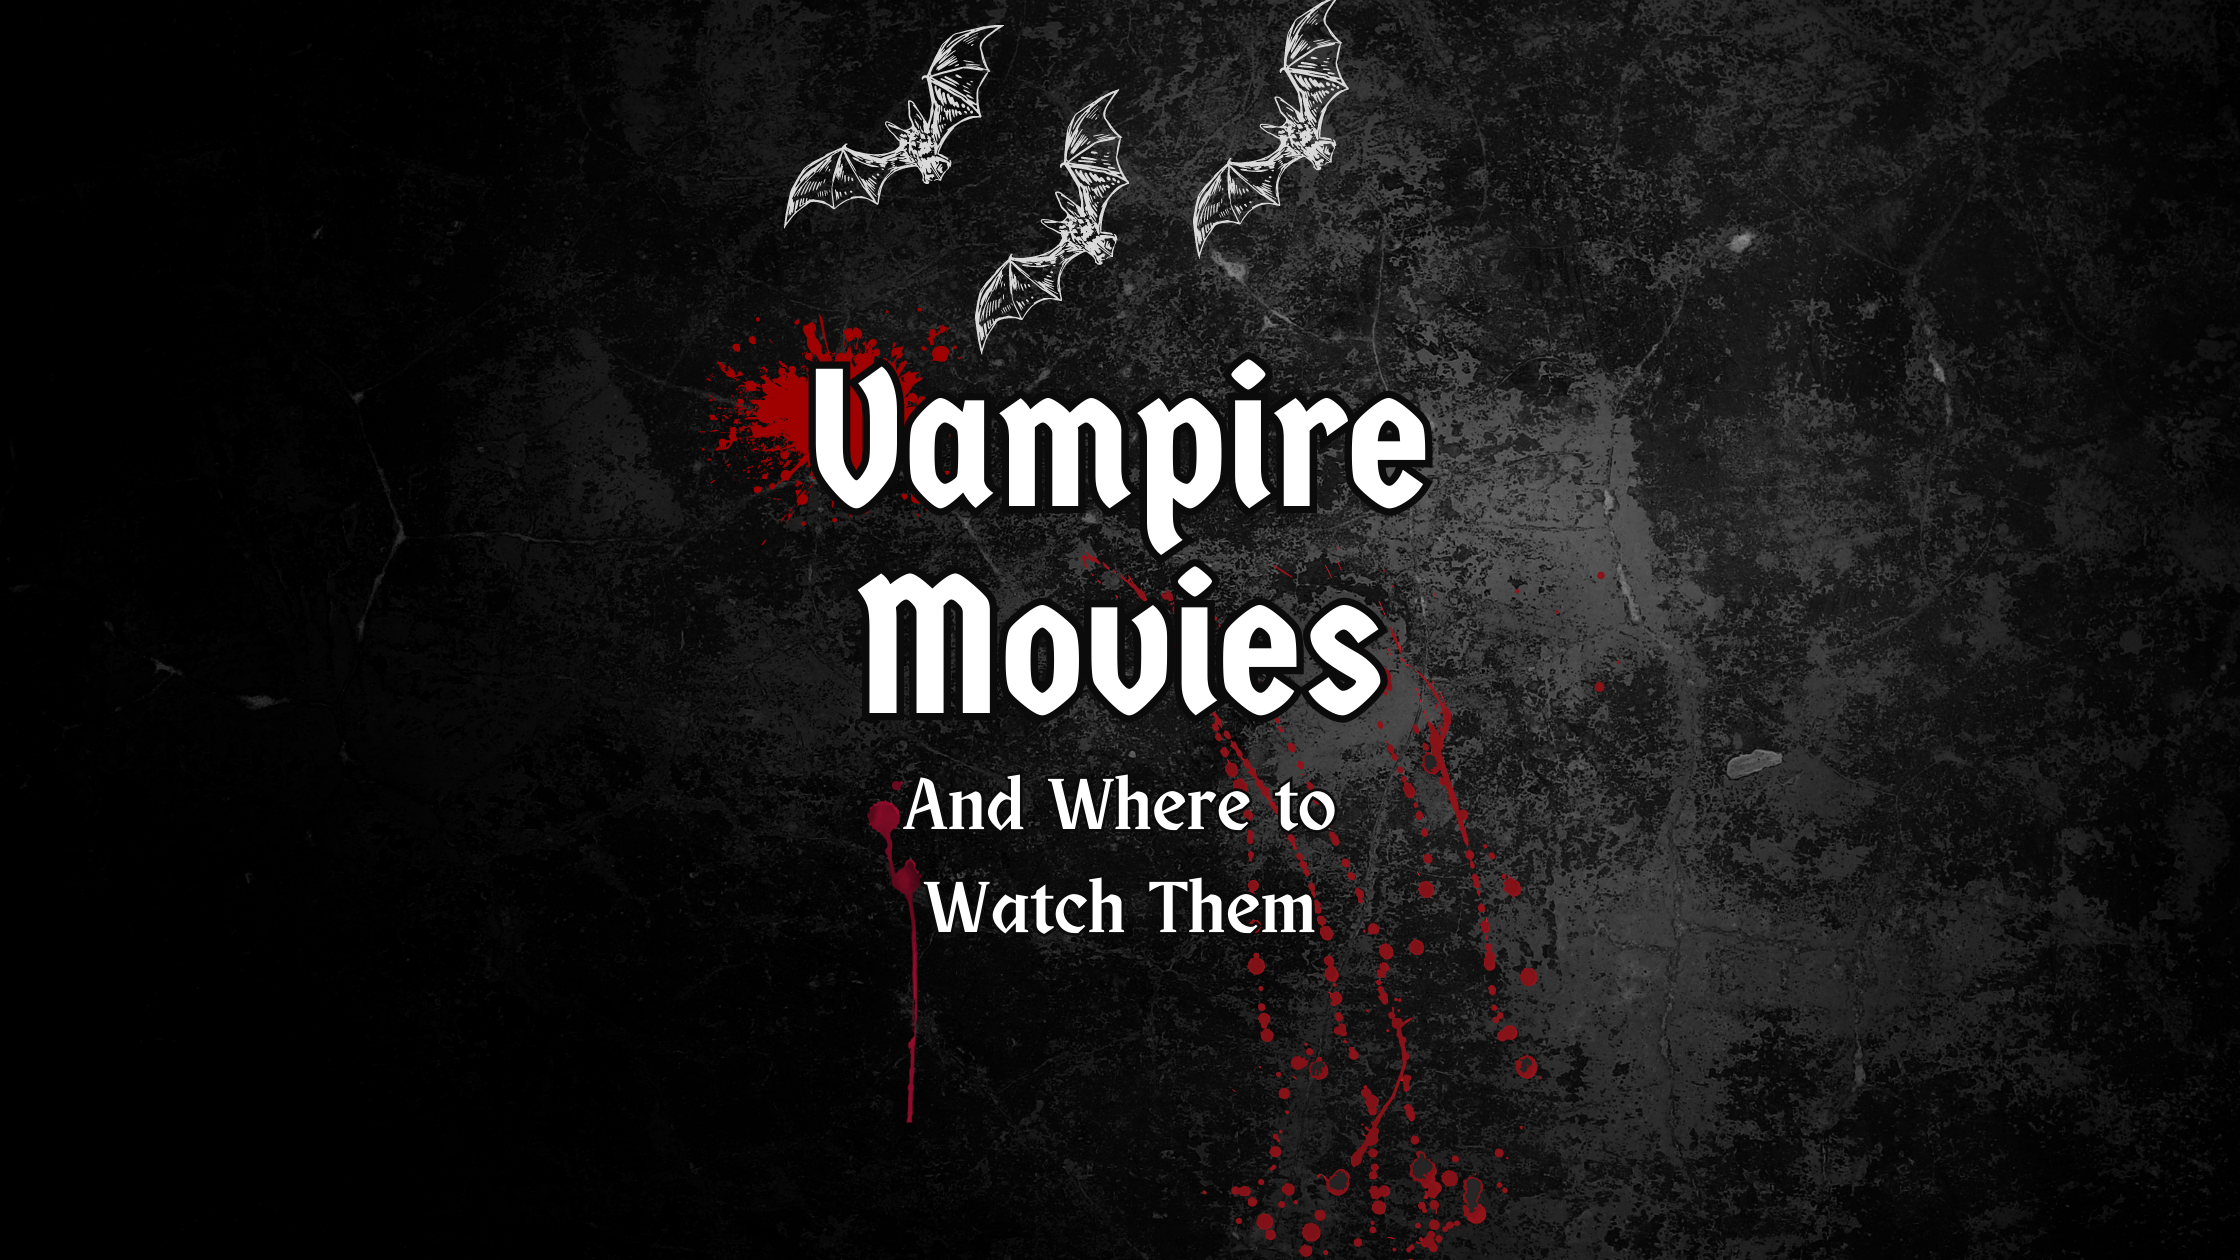 Vampire movies and where to watch them